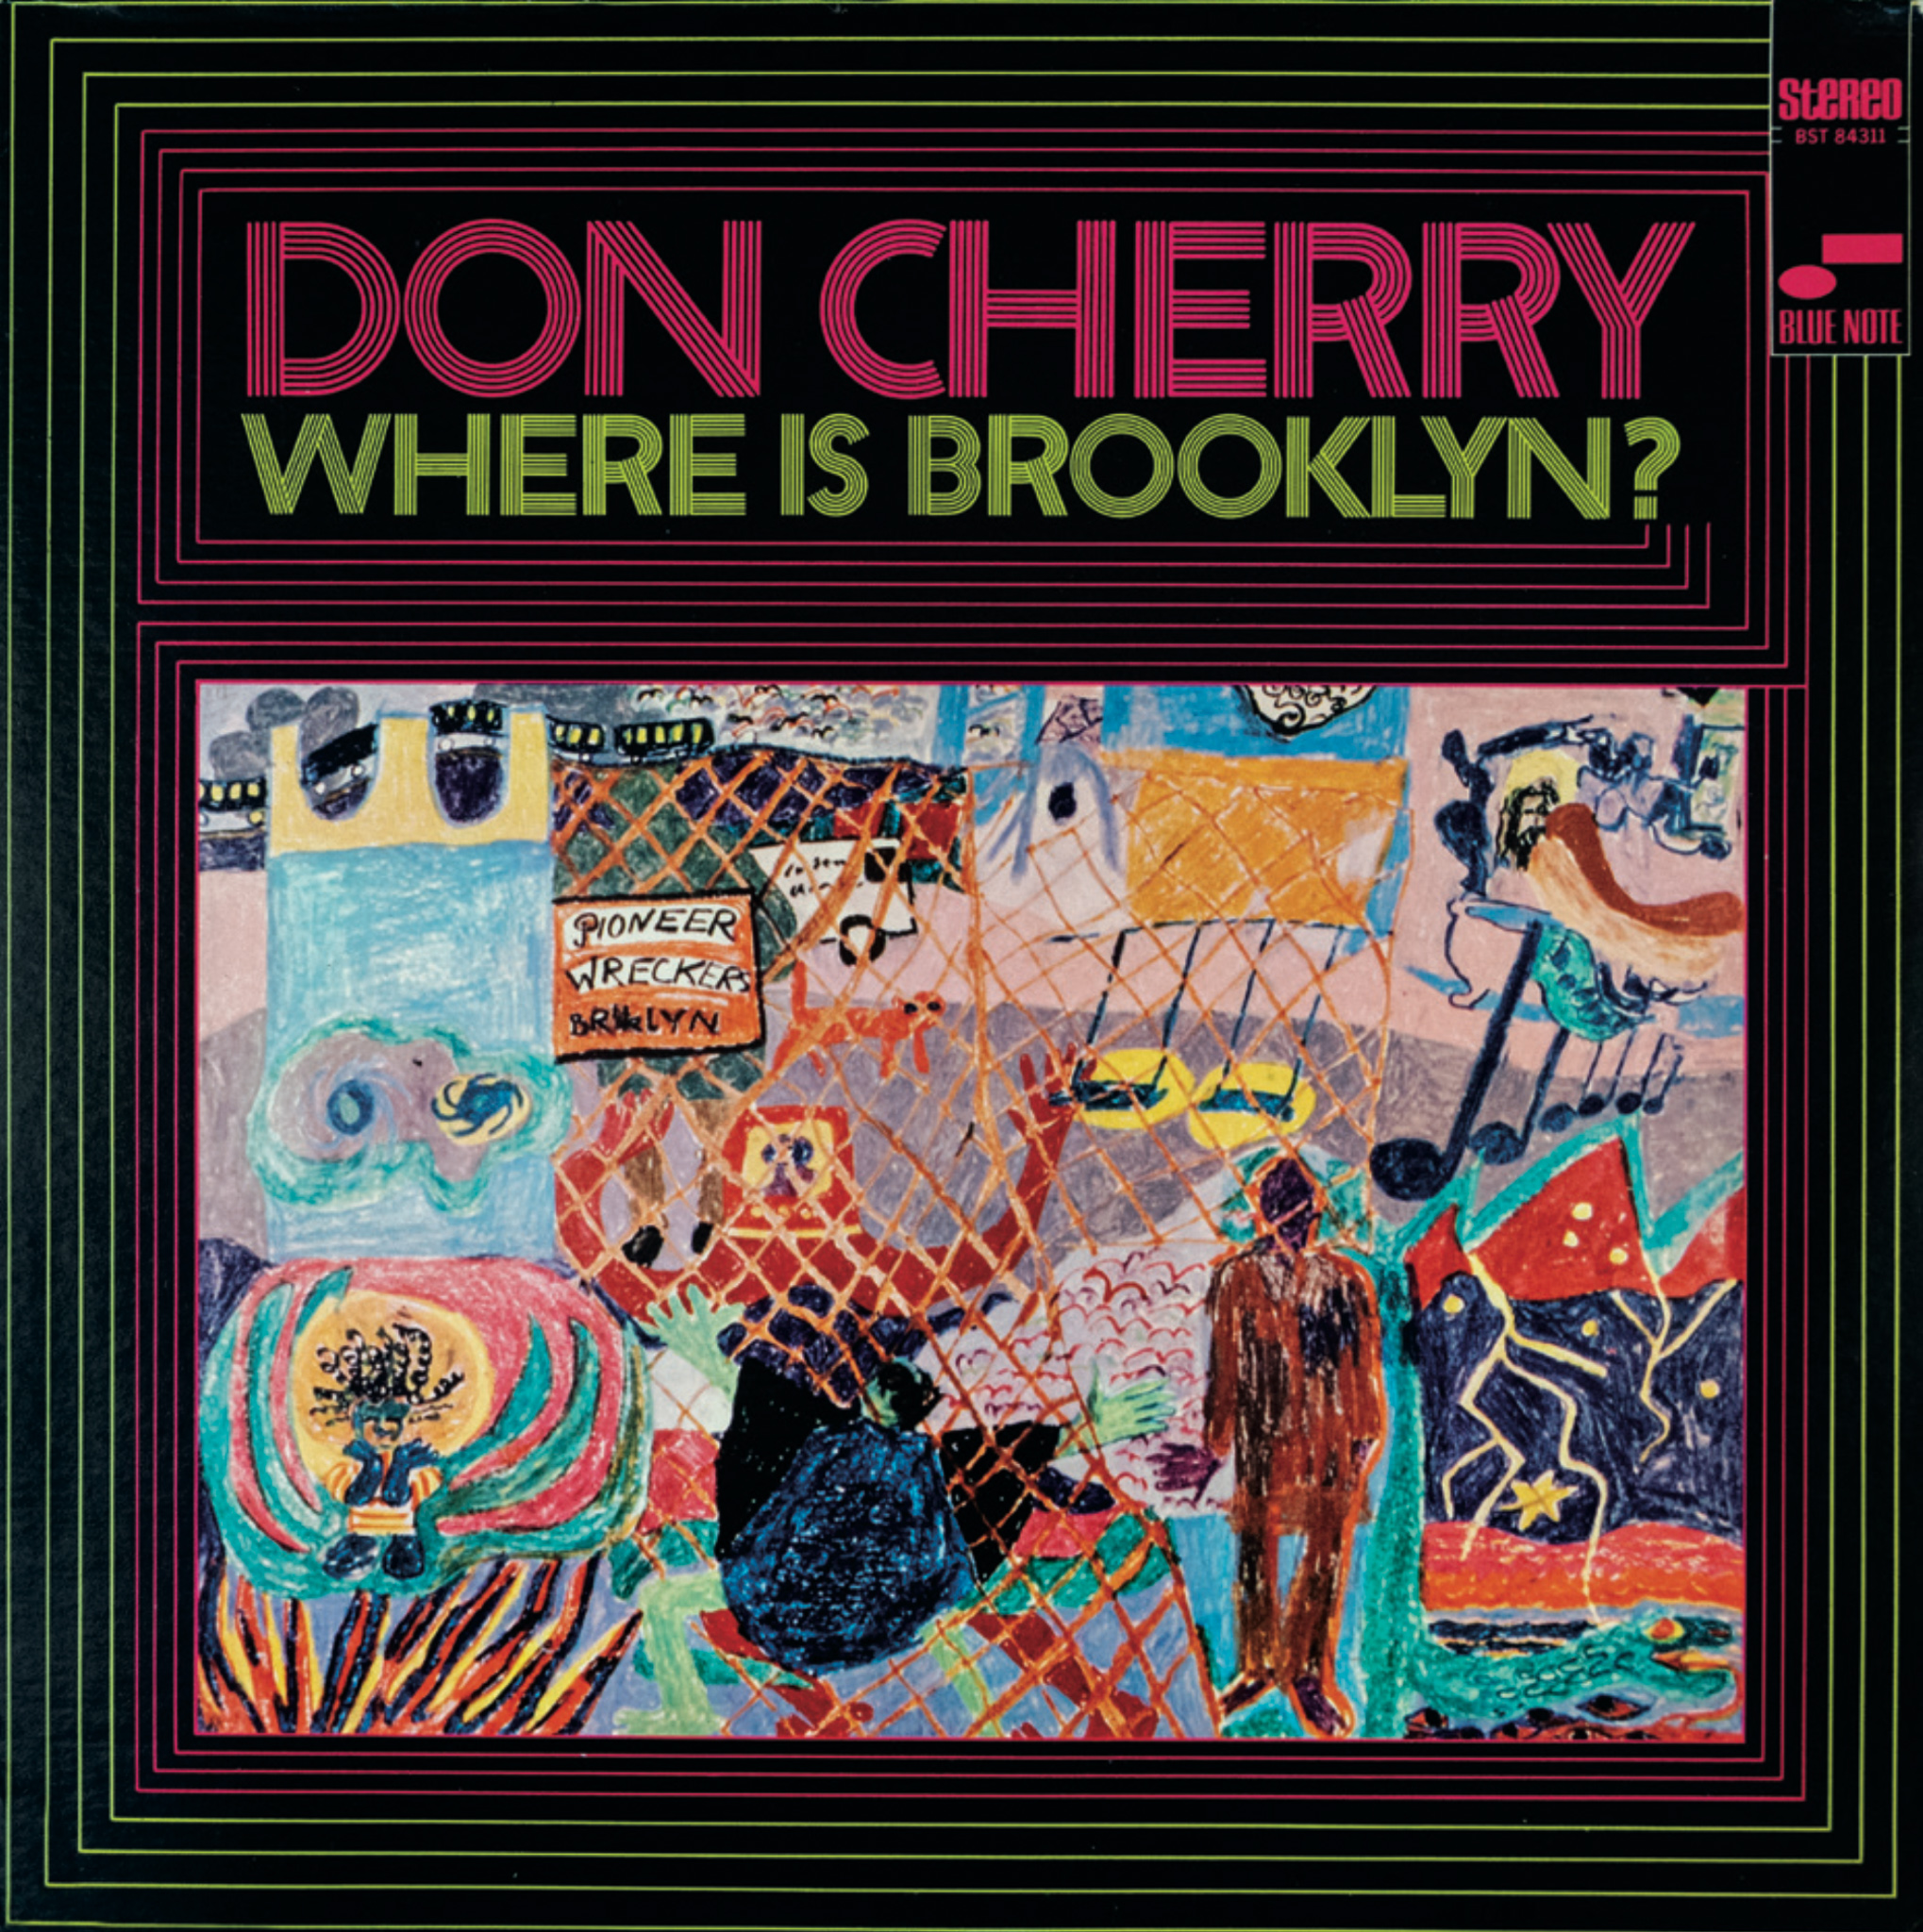 Album cover for Don Cherry’s Where is Brooklyn? (Blue Note, 1969),